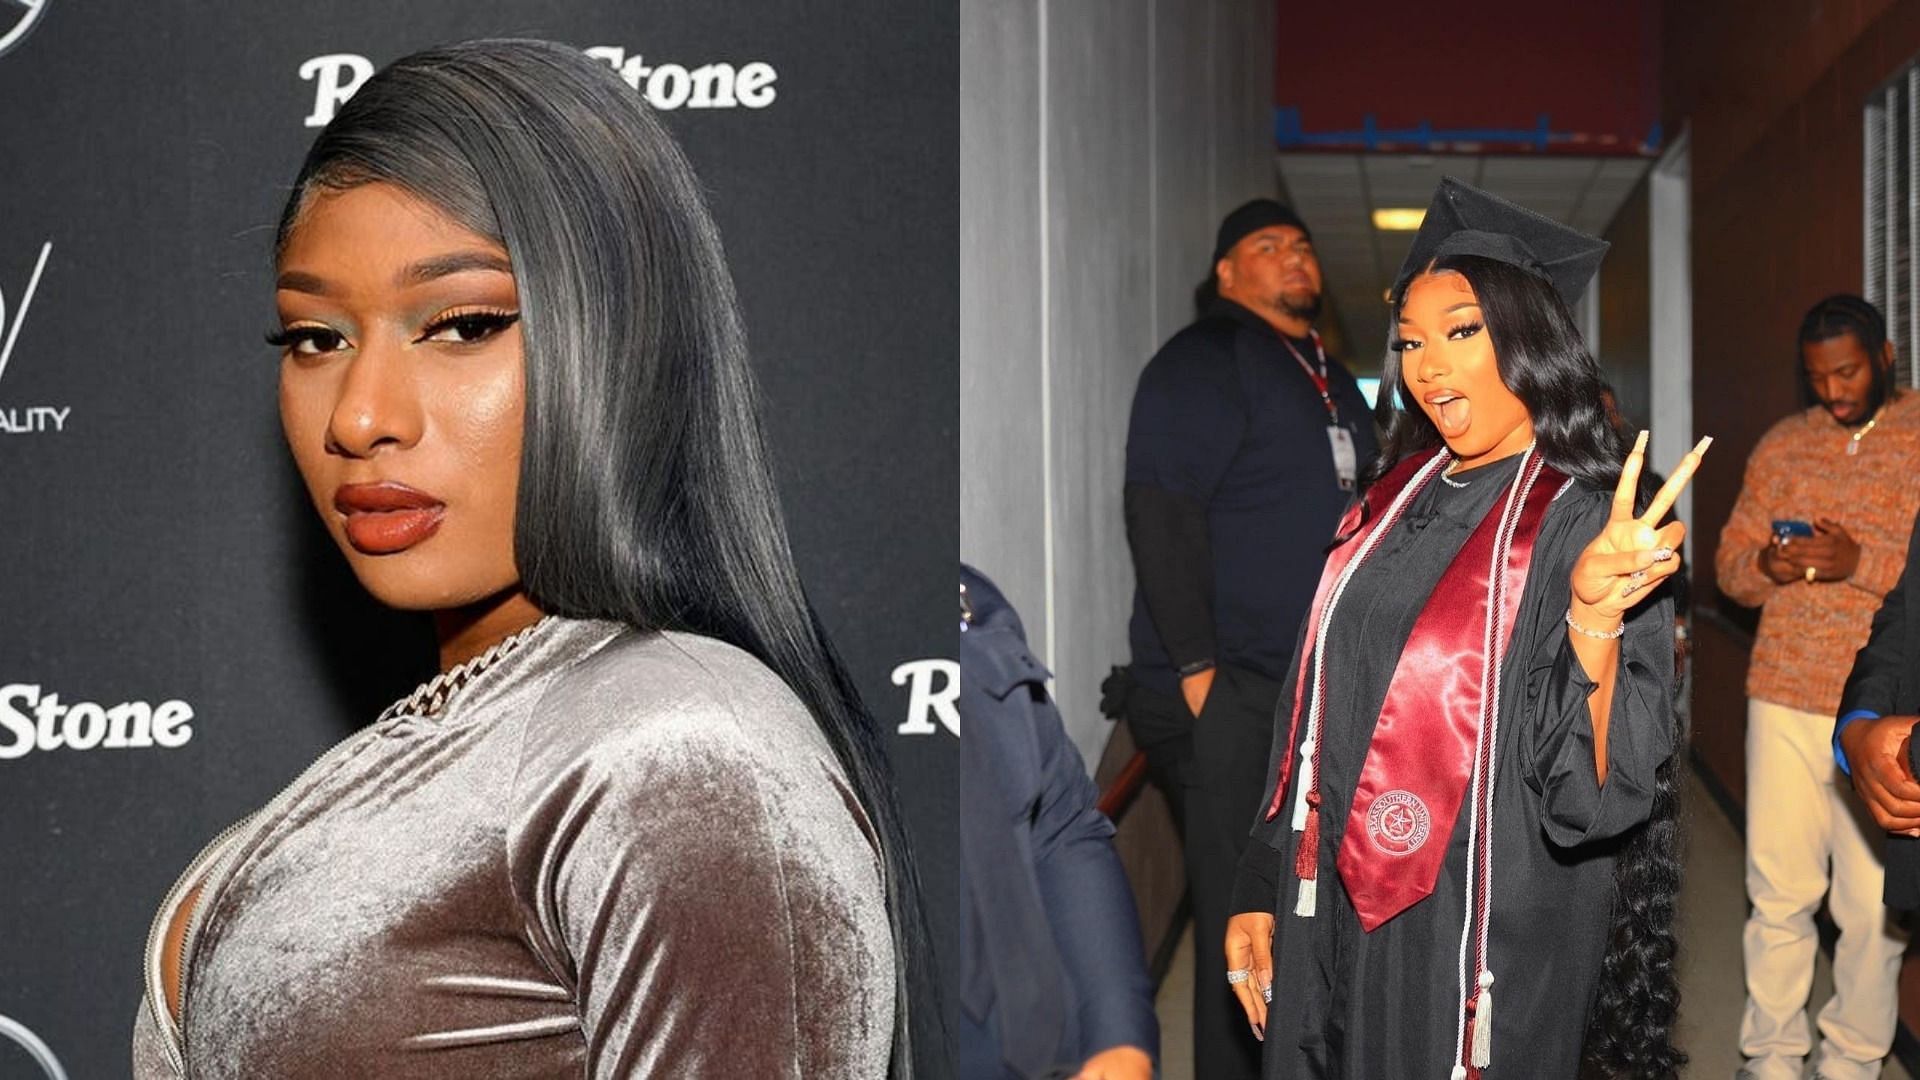 Megan Thee Stallion enrolled in Texas Southern University in 2020 and finished her course via online classes in 2021 (Image via Sportskeeda)